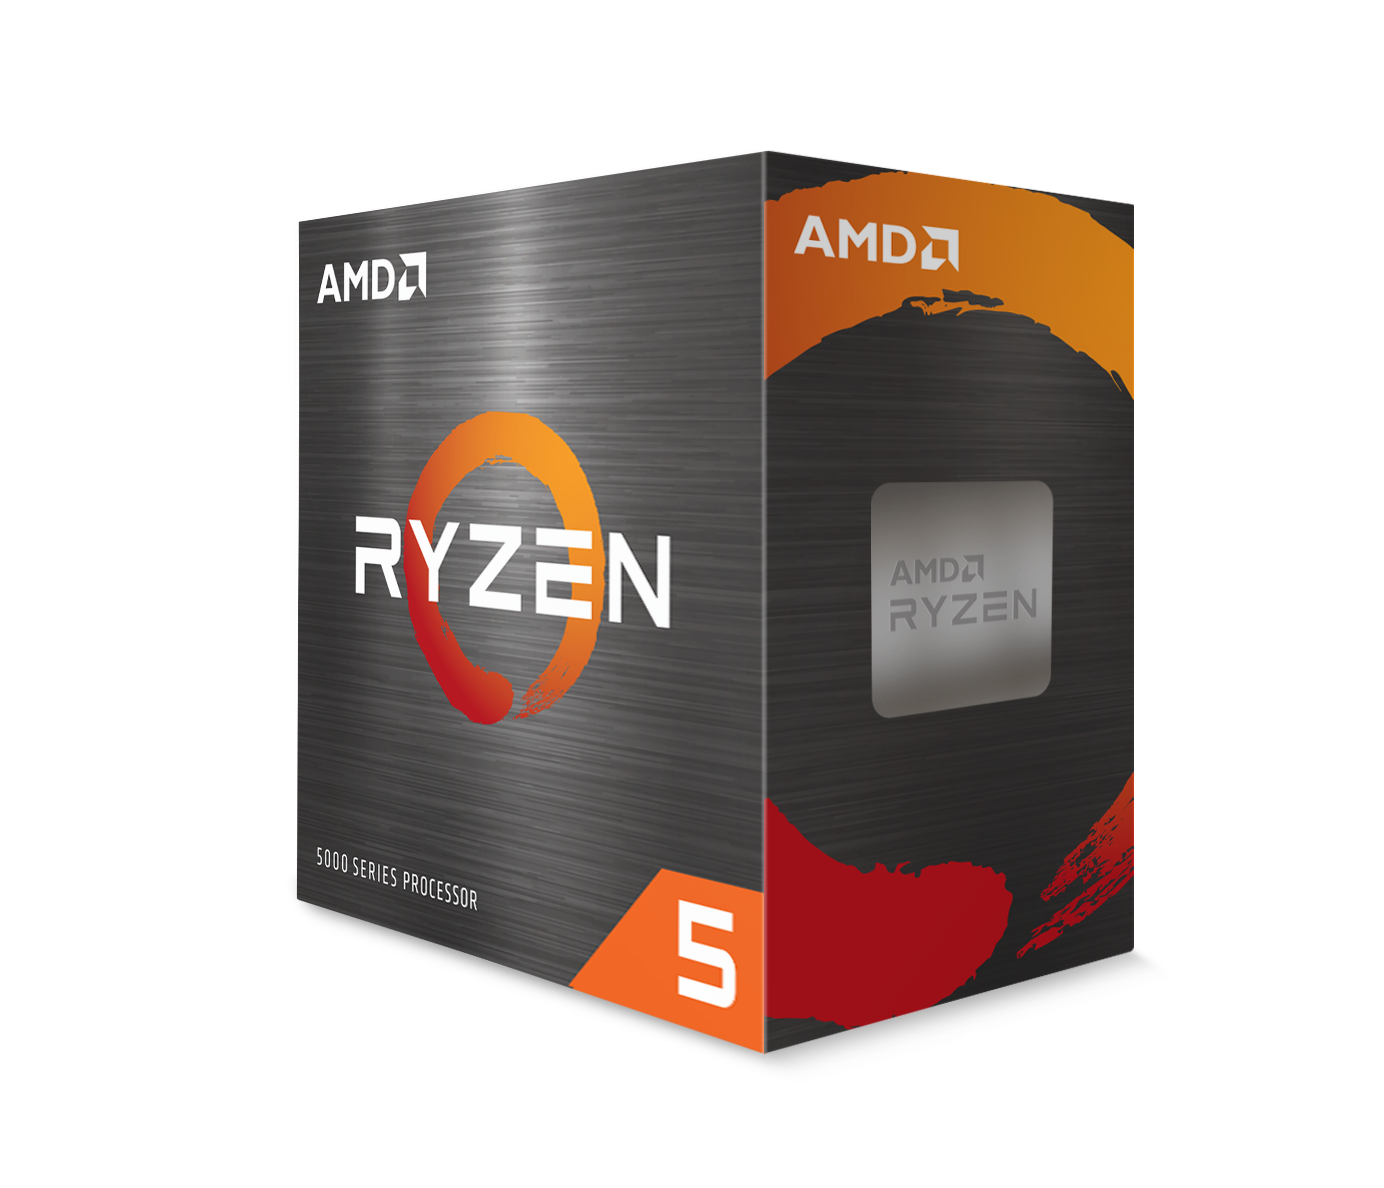 AMD Ryzen 5 5600X With Wraith Stealth Cooler BOX / OVERCLOCK WORKS